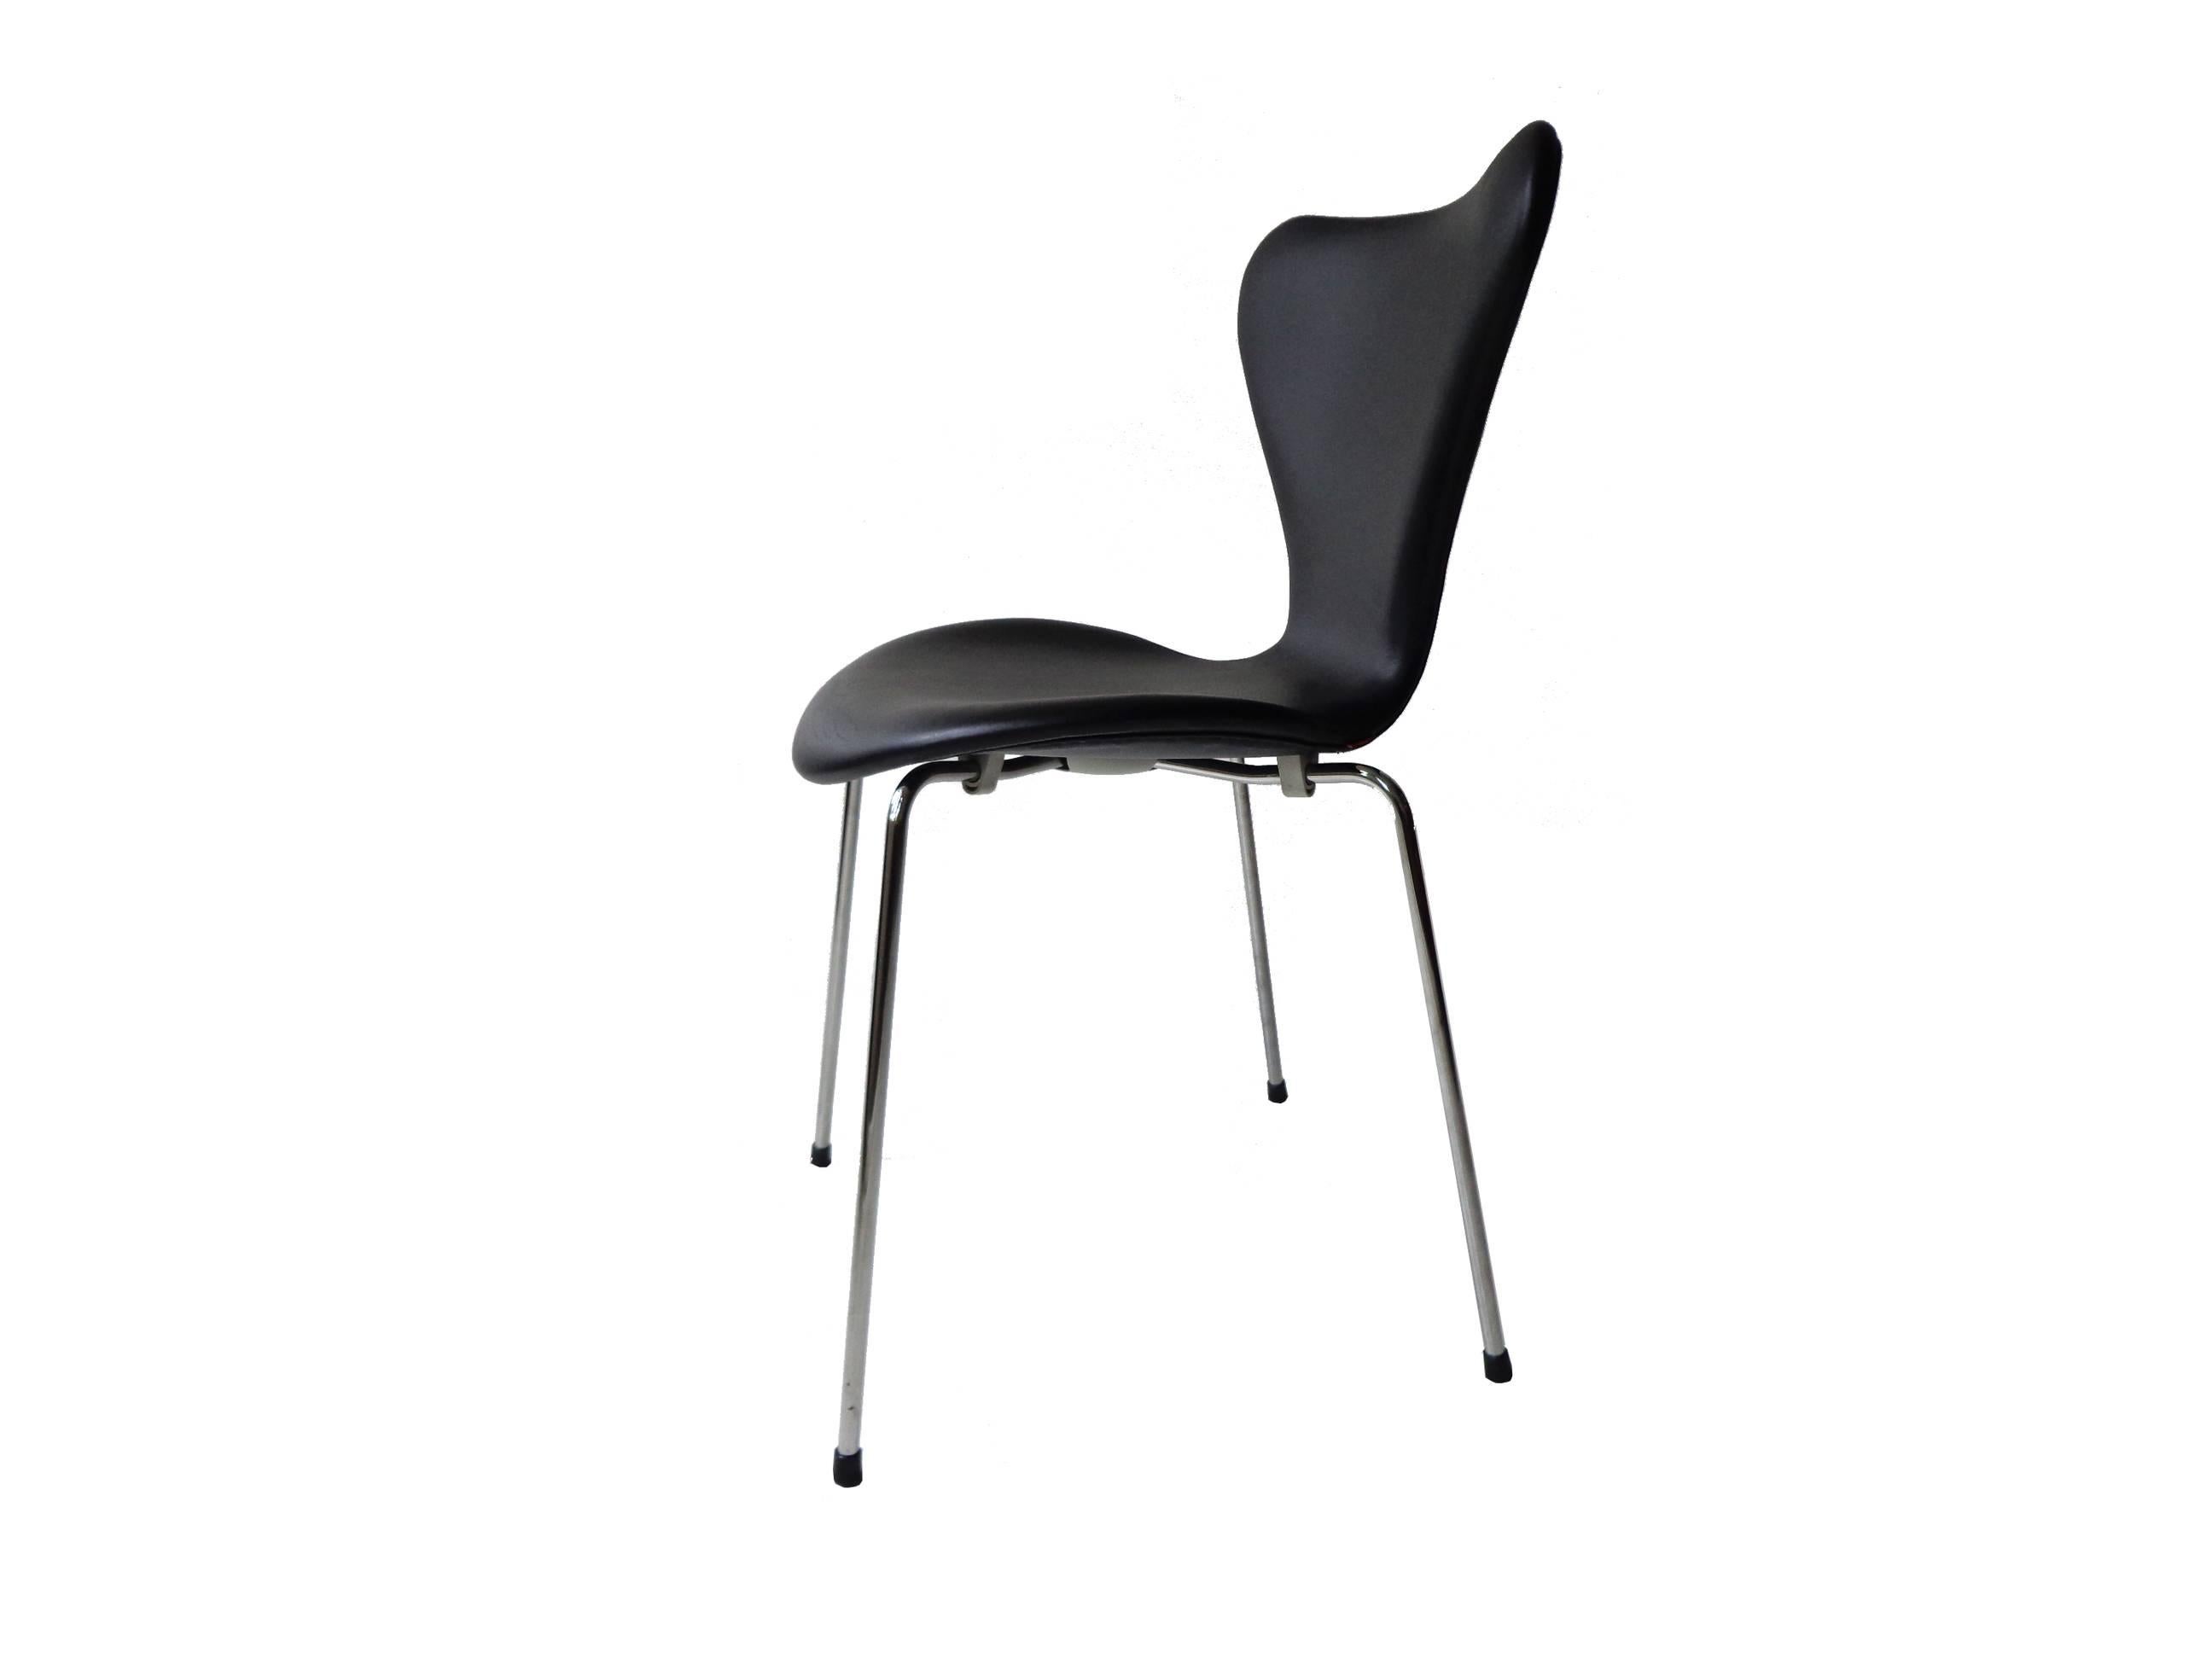 Offerd by Zitzo, Amsterdam: Model 3107 or Seven chair. The shell is made in pressure molded veneer, the inner veneer is beech, fully upholsterd in the finest original black elegance sense leather.
The base is chromed metal. Original labeld by Fritz